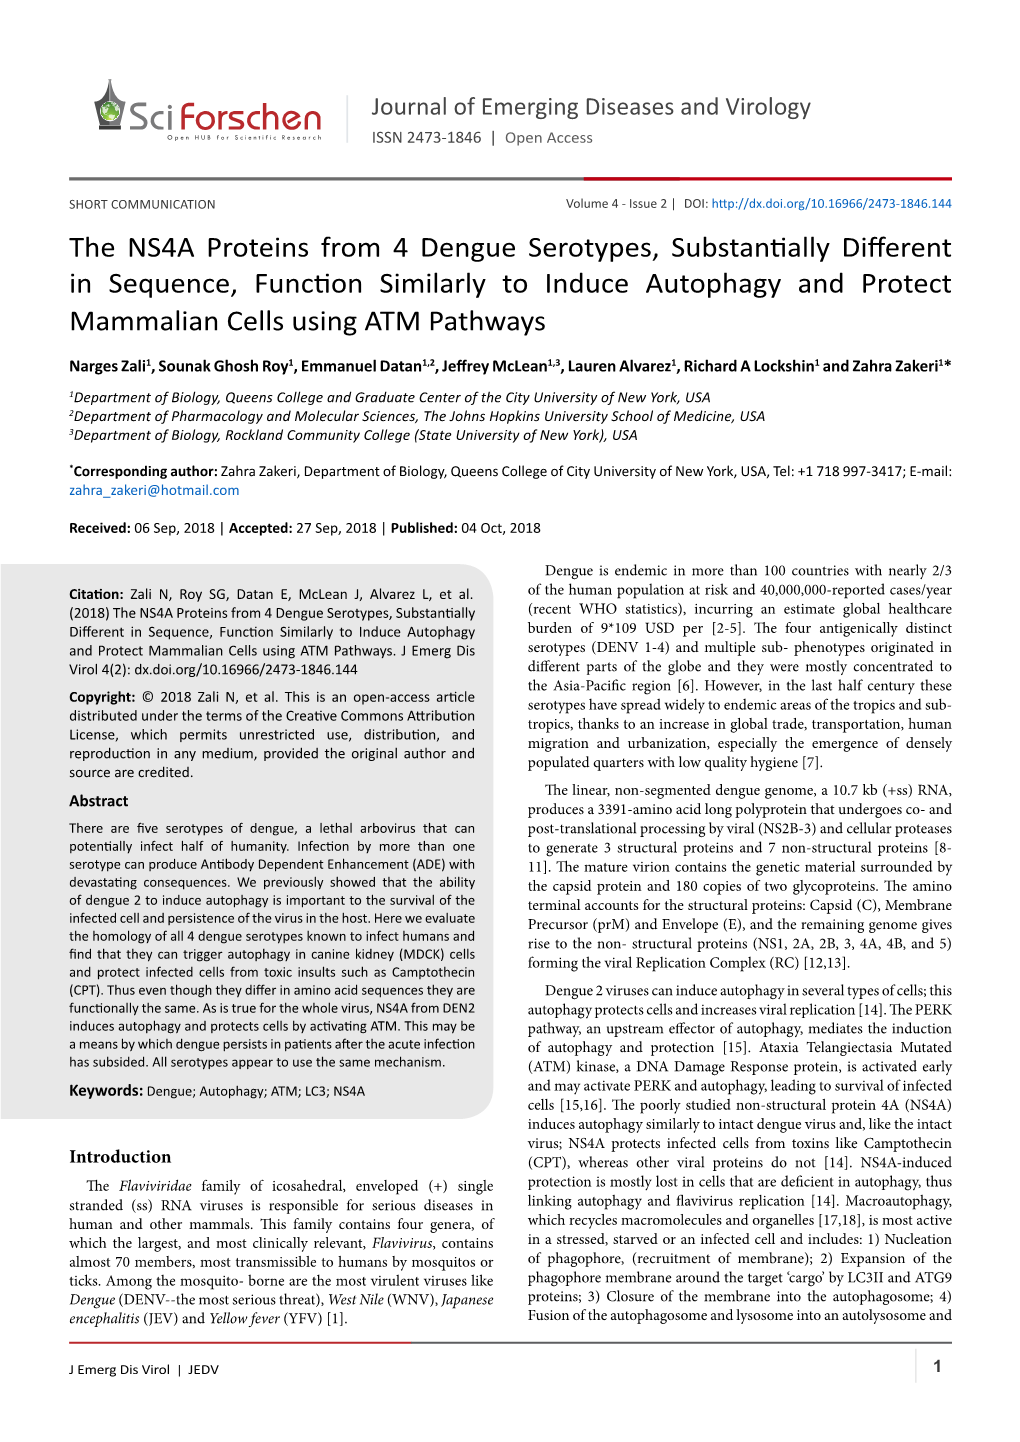 The NS4A Proteins from 4 Dengue Serotypes, Substantially Differentin